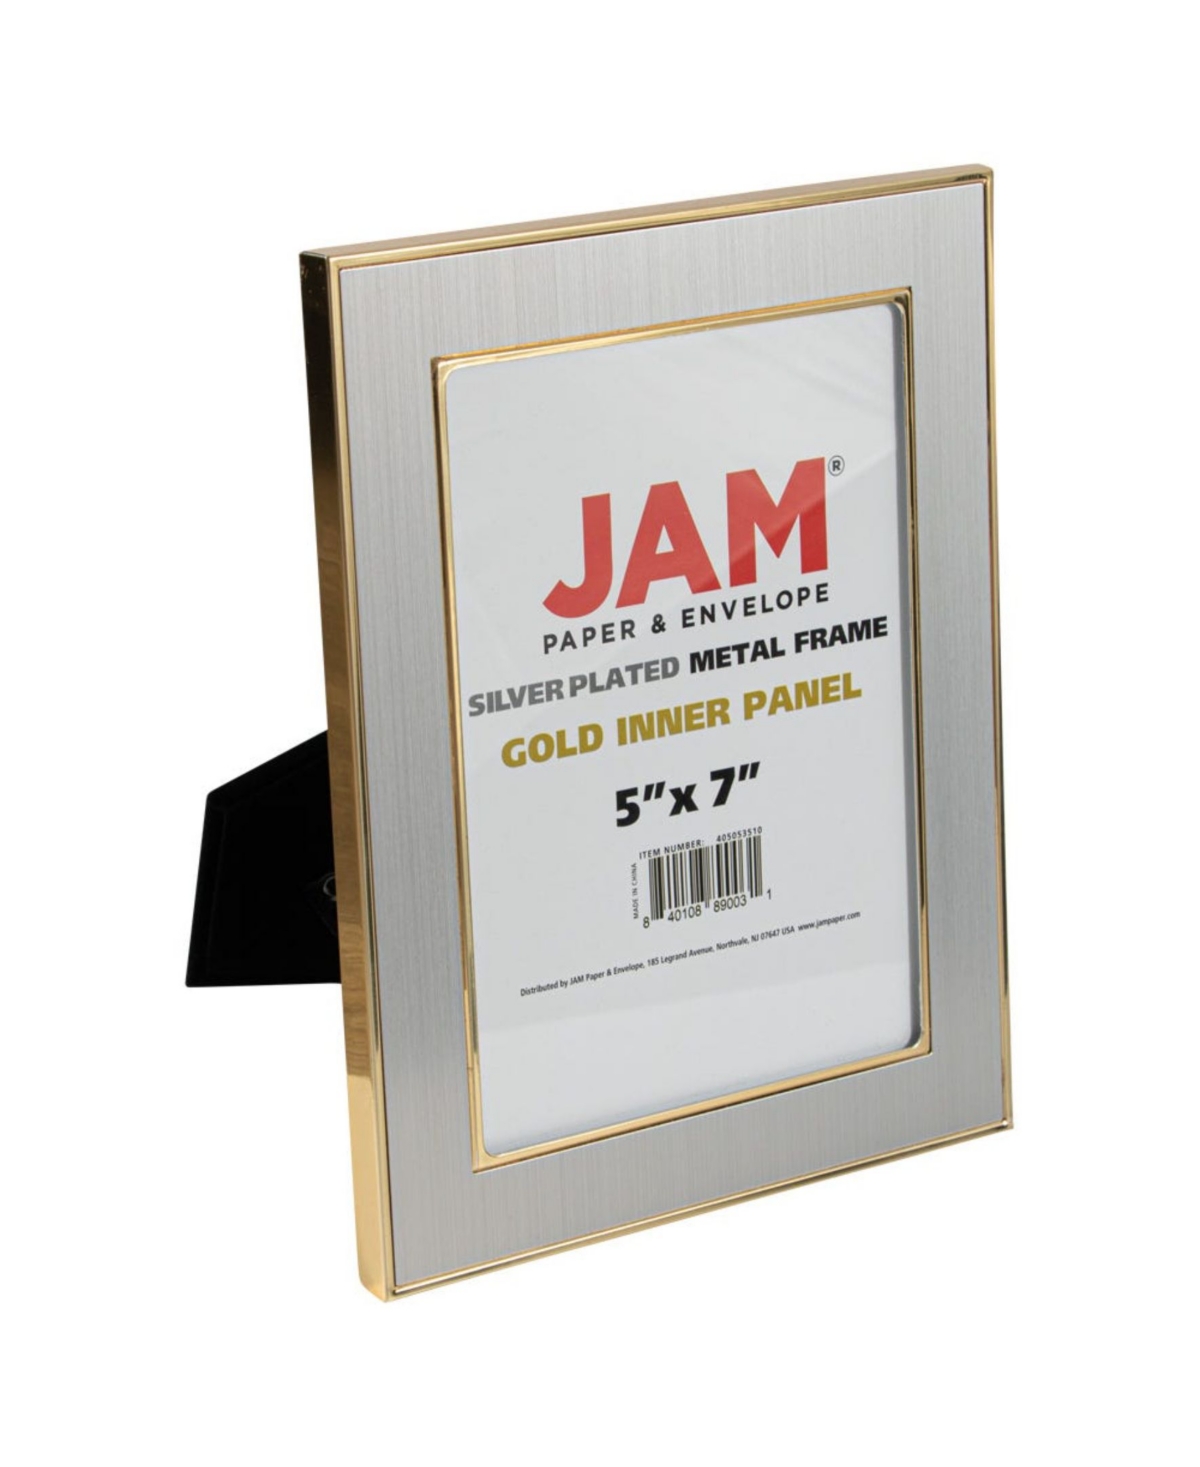 Jam Paper Silver Plated Metal Picture Frame In Silver With Gold Inner Panel